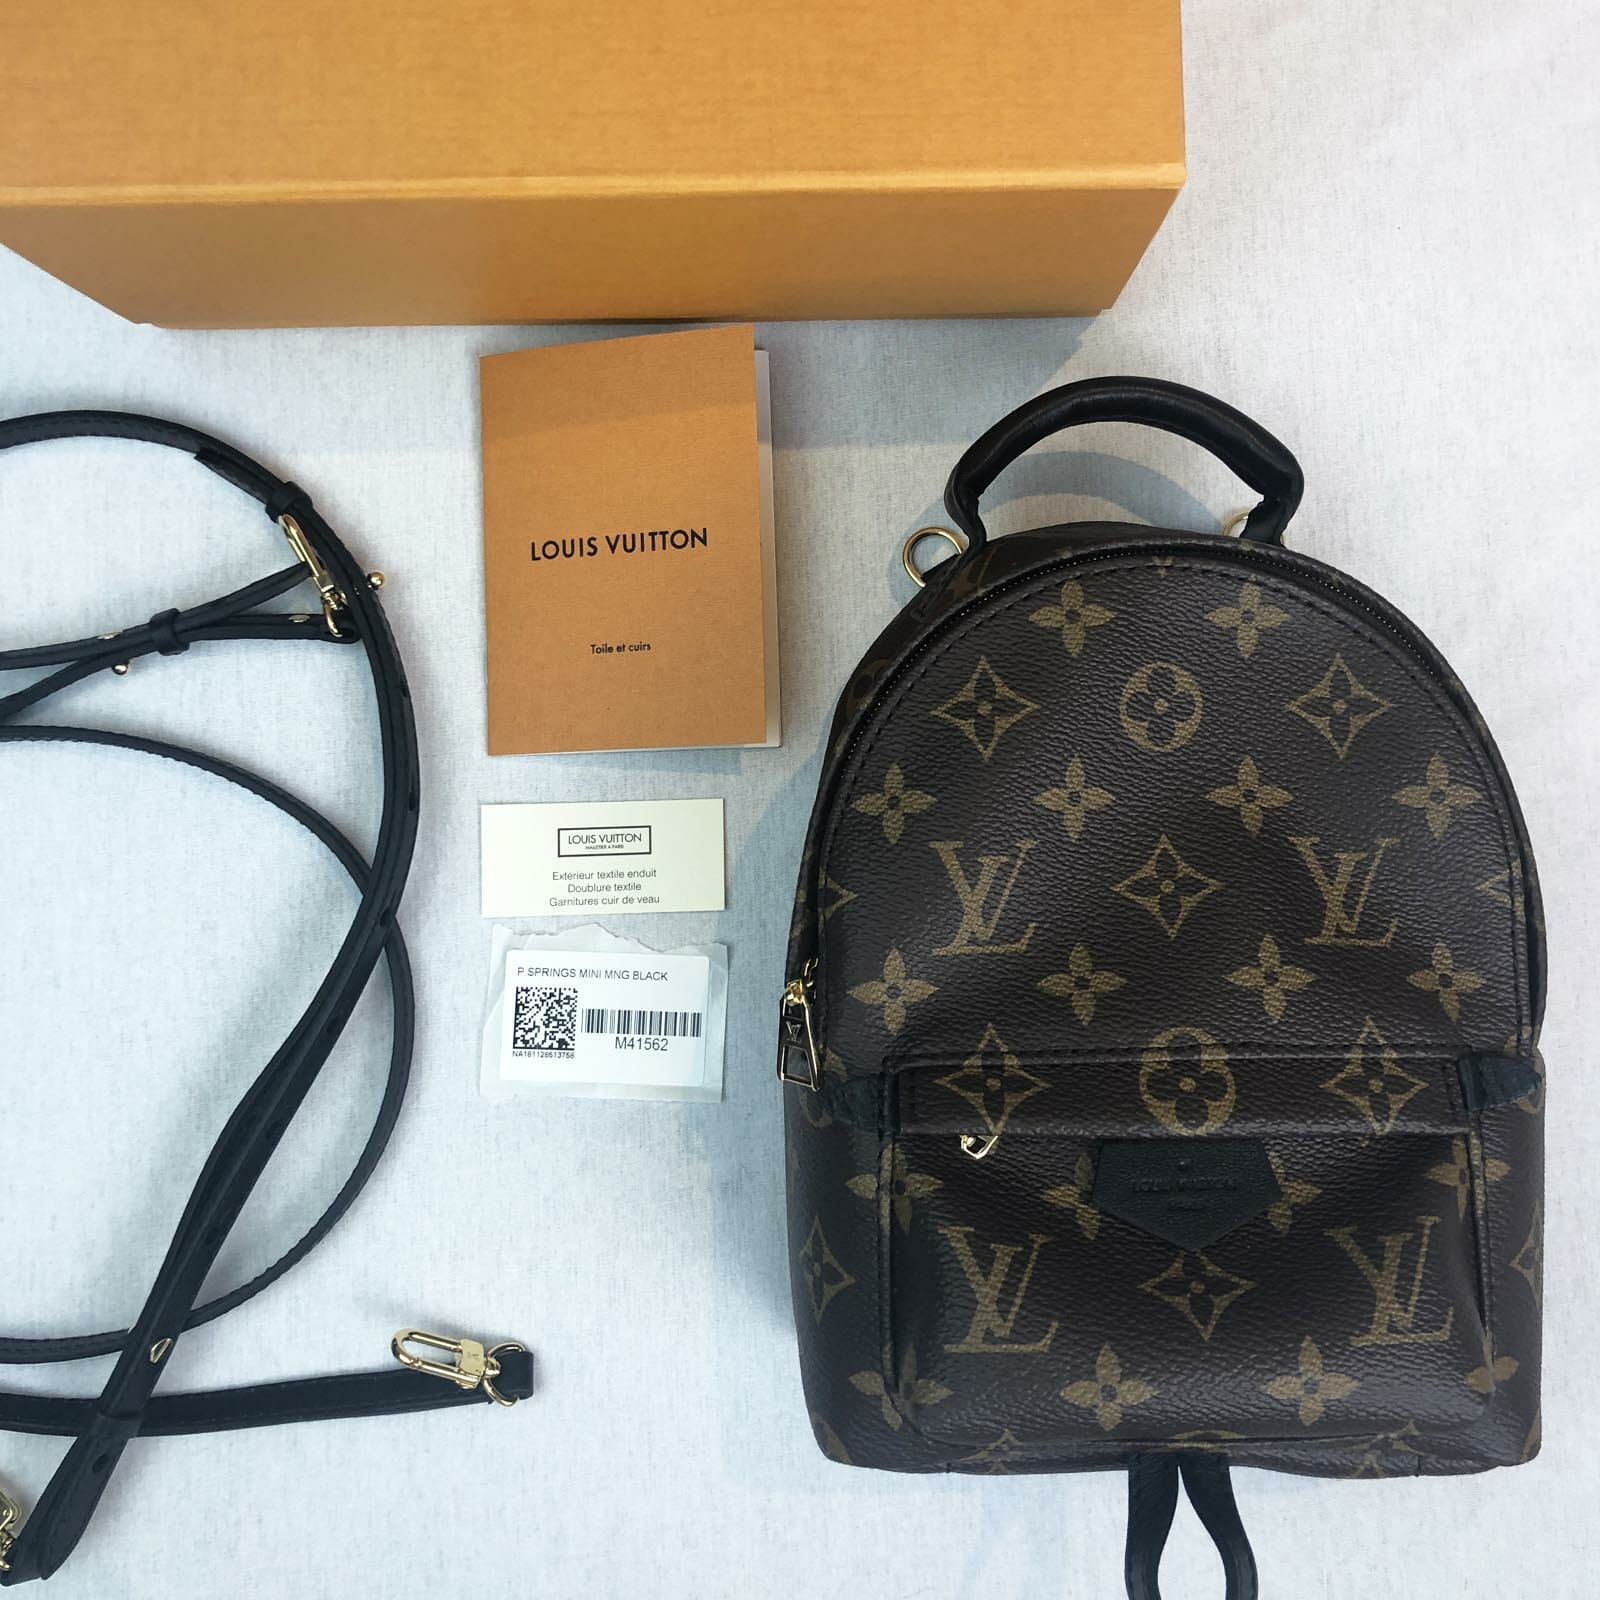 LV Palm Springs Mini Backpack - How to convert the straps